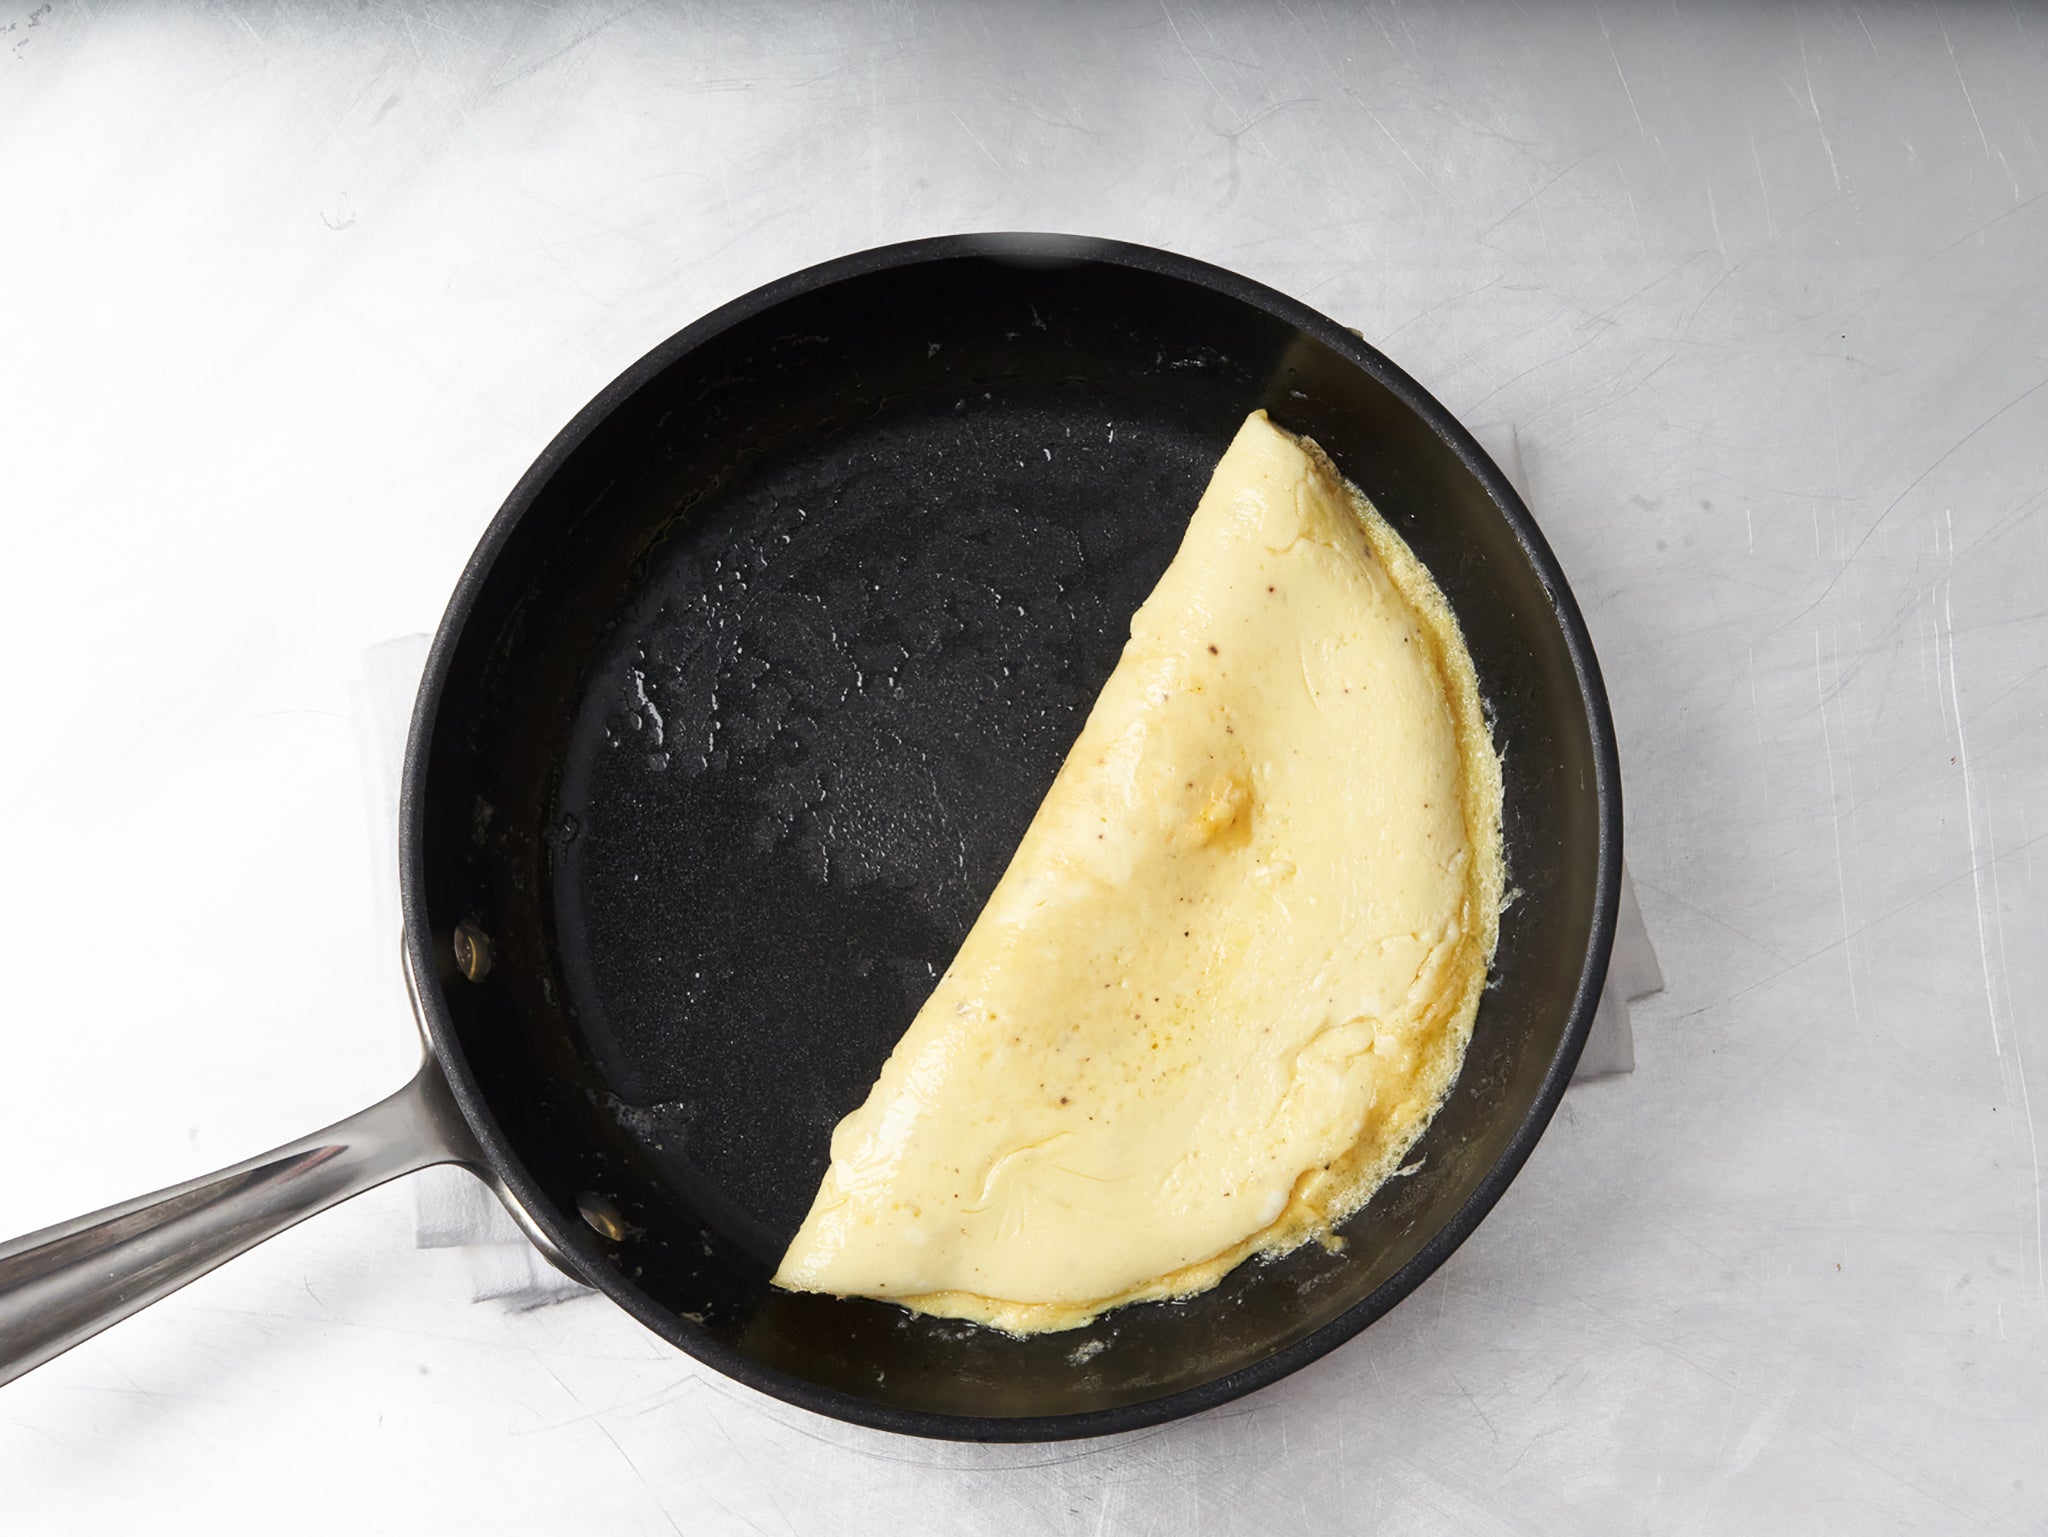 There are several factors to consider, from the pan to the toppings, when cooking an omelette to perfection